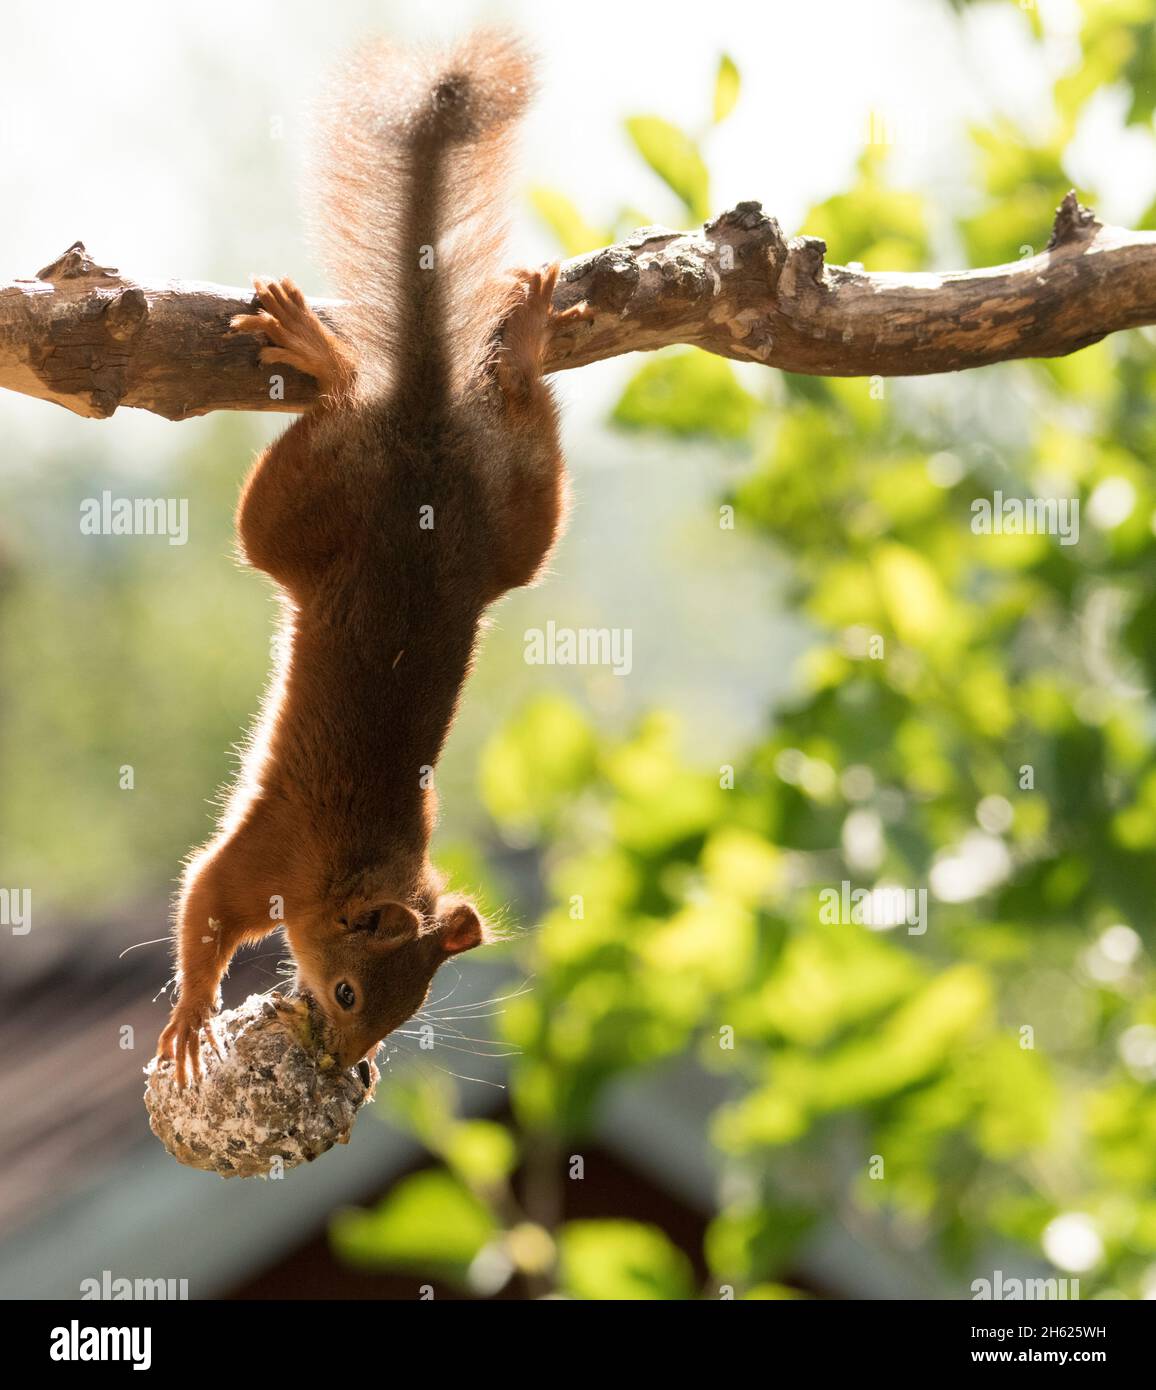 red squirrel hanging upside down with pinecone Stock Photo